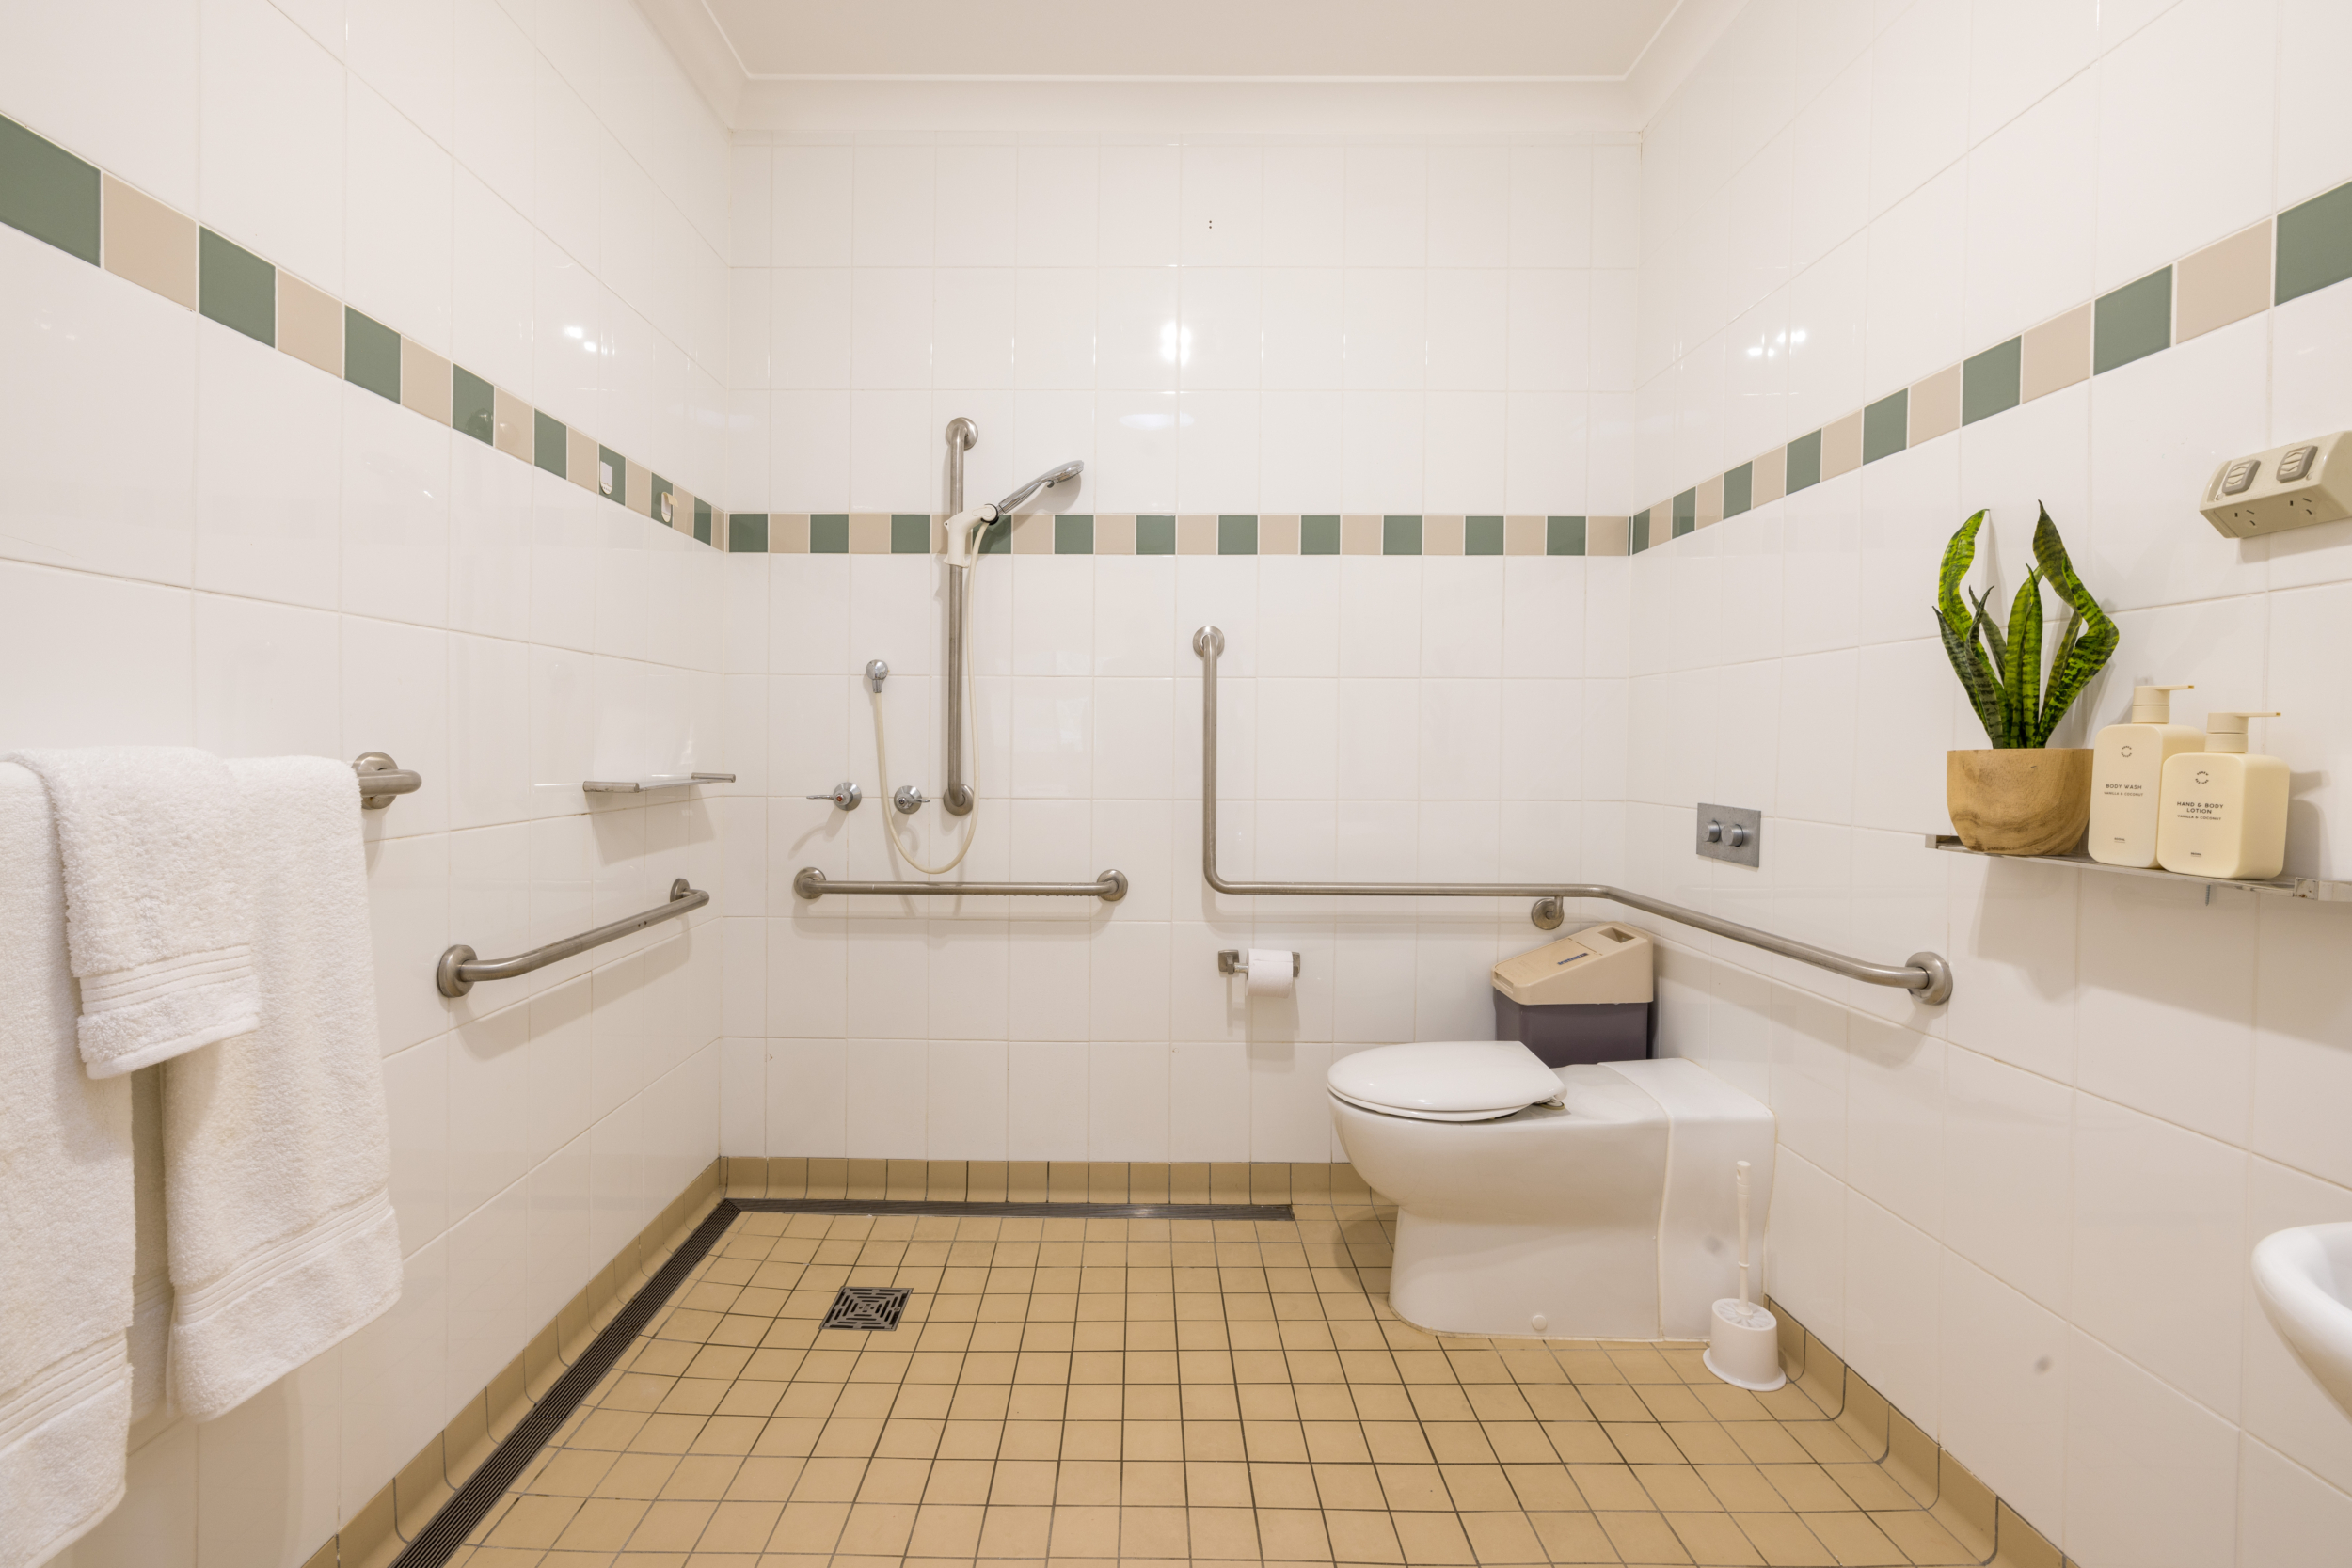 Accessible bathroom with assistive features